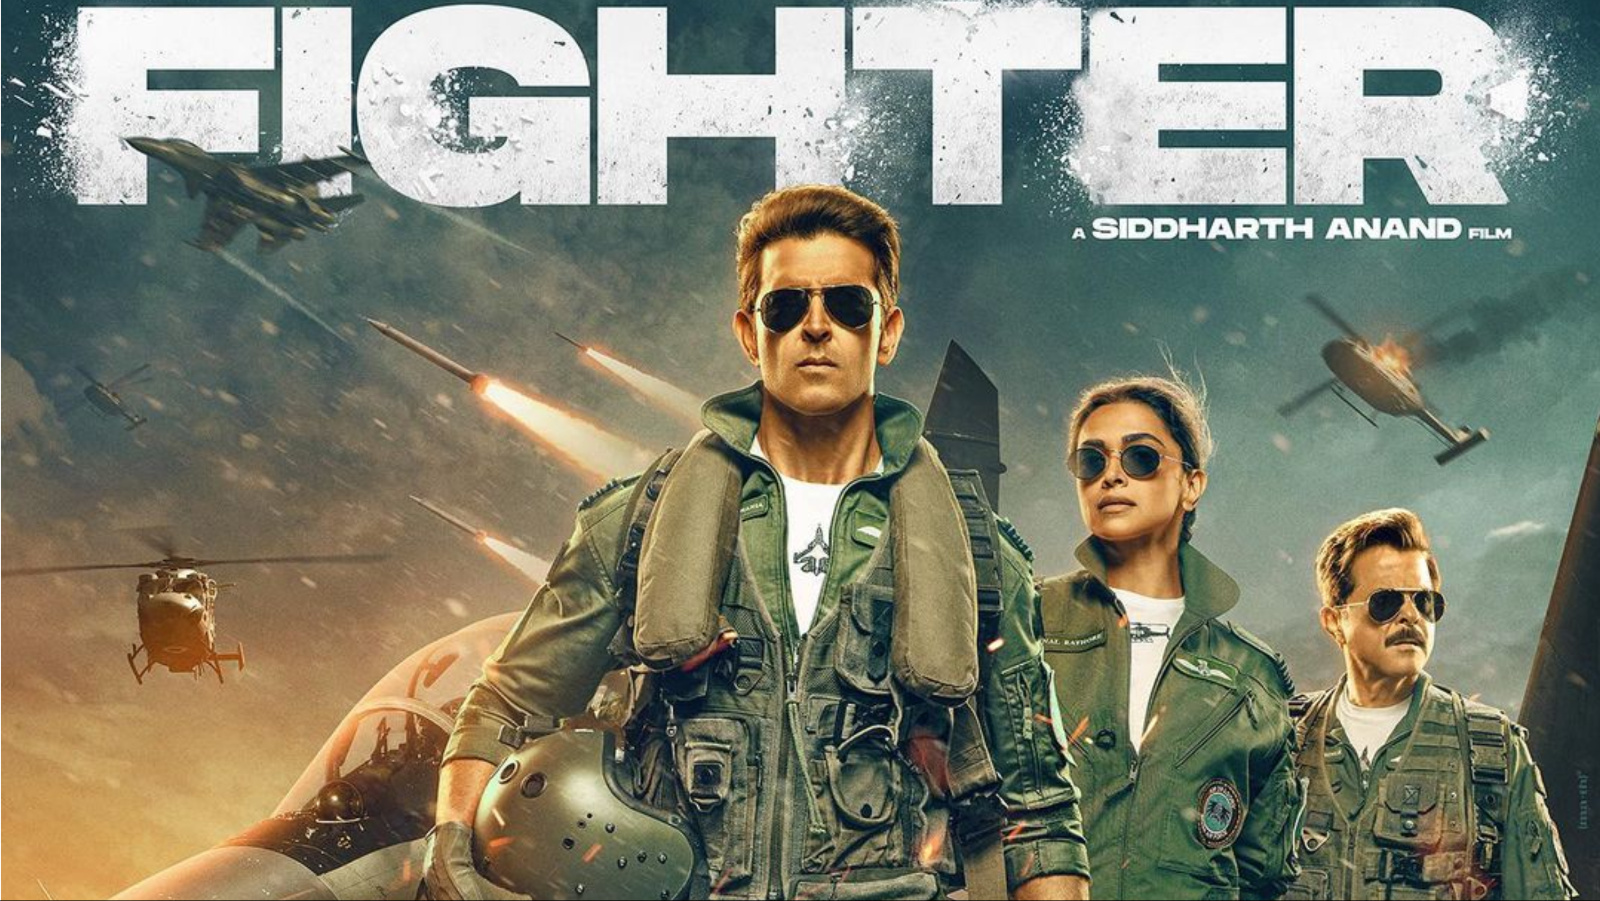 Fighter banned in MiddleEastern countries; only UAE to release Hrithik